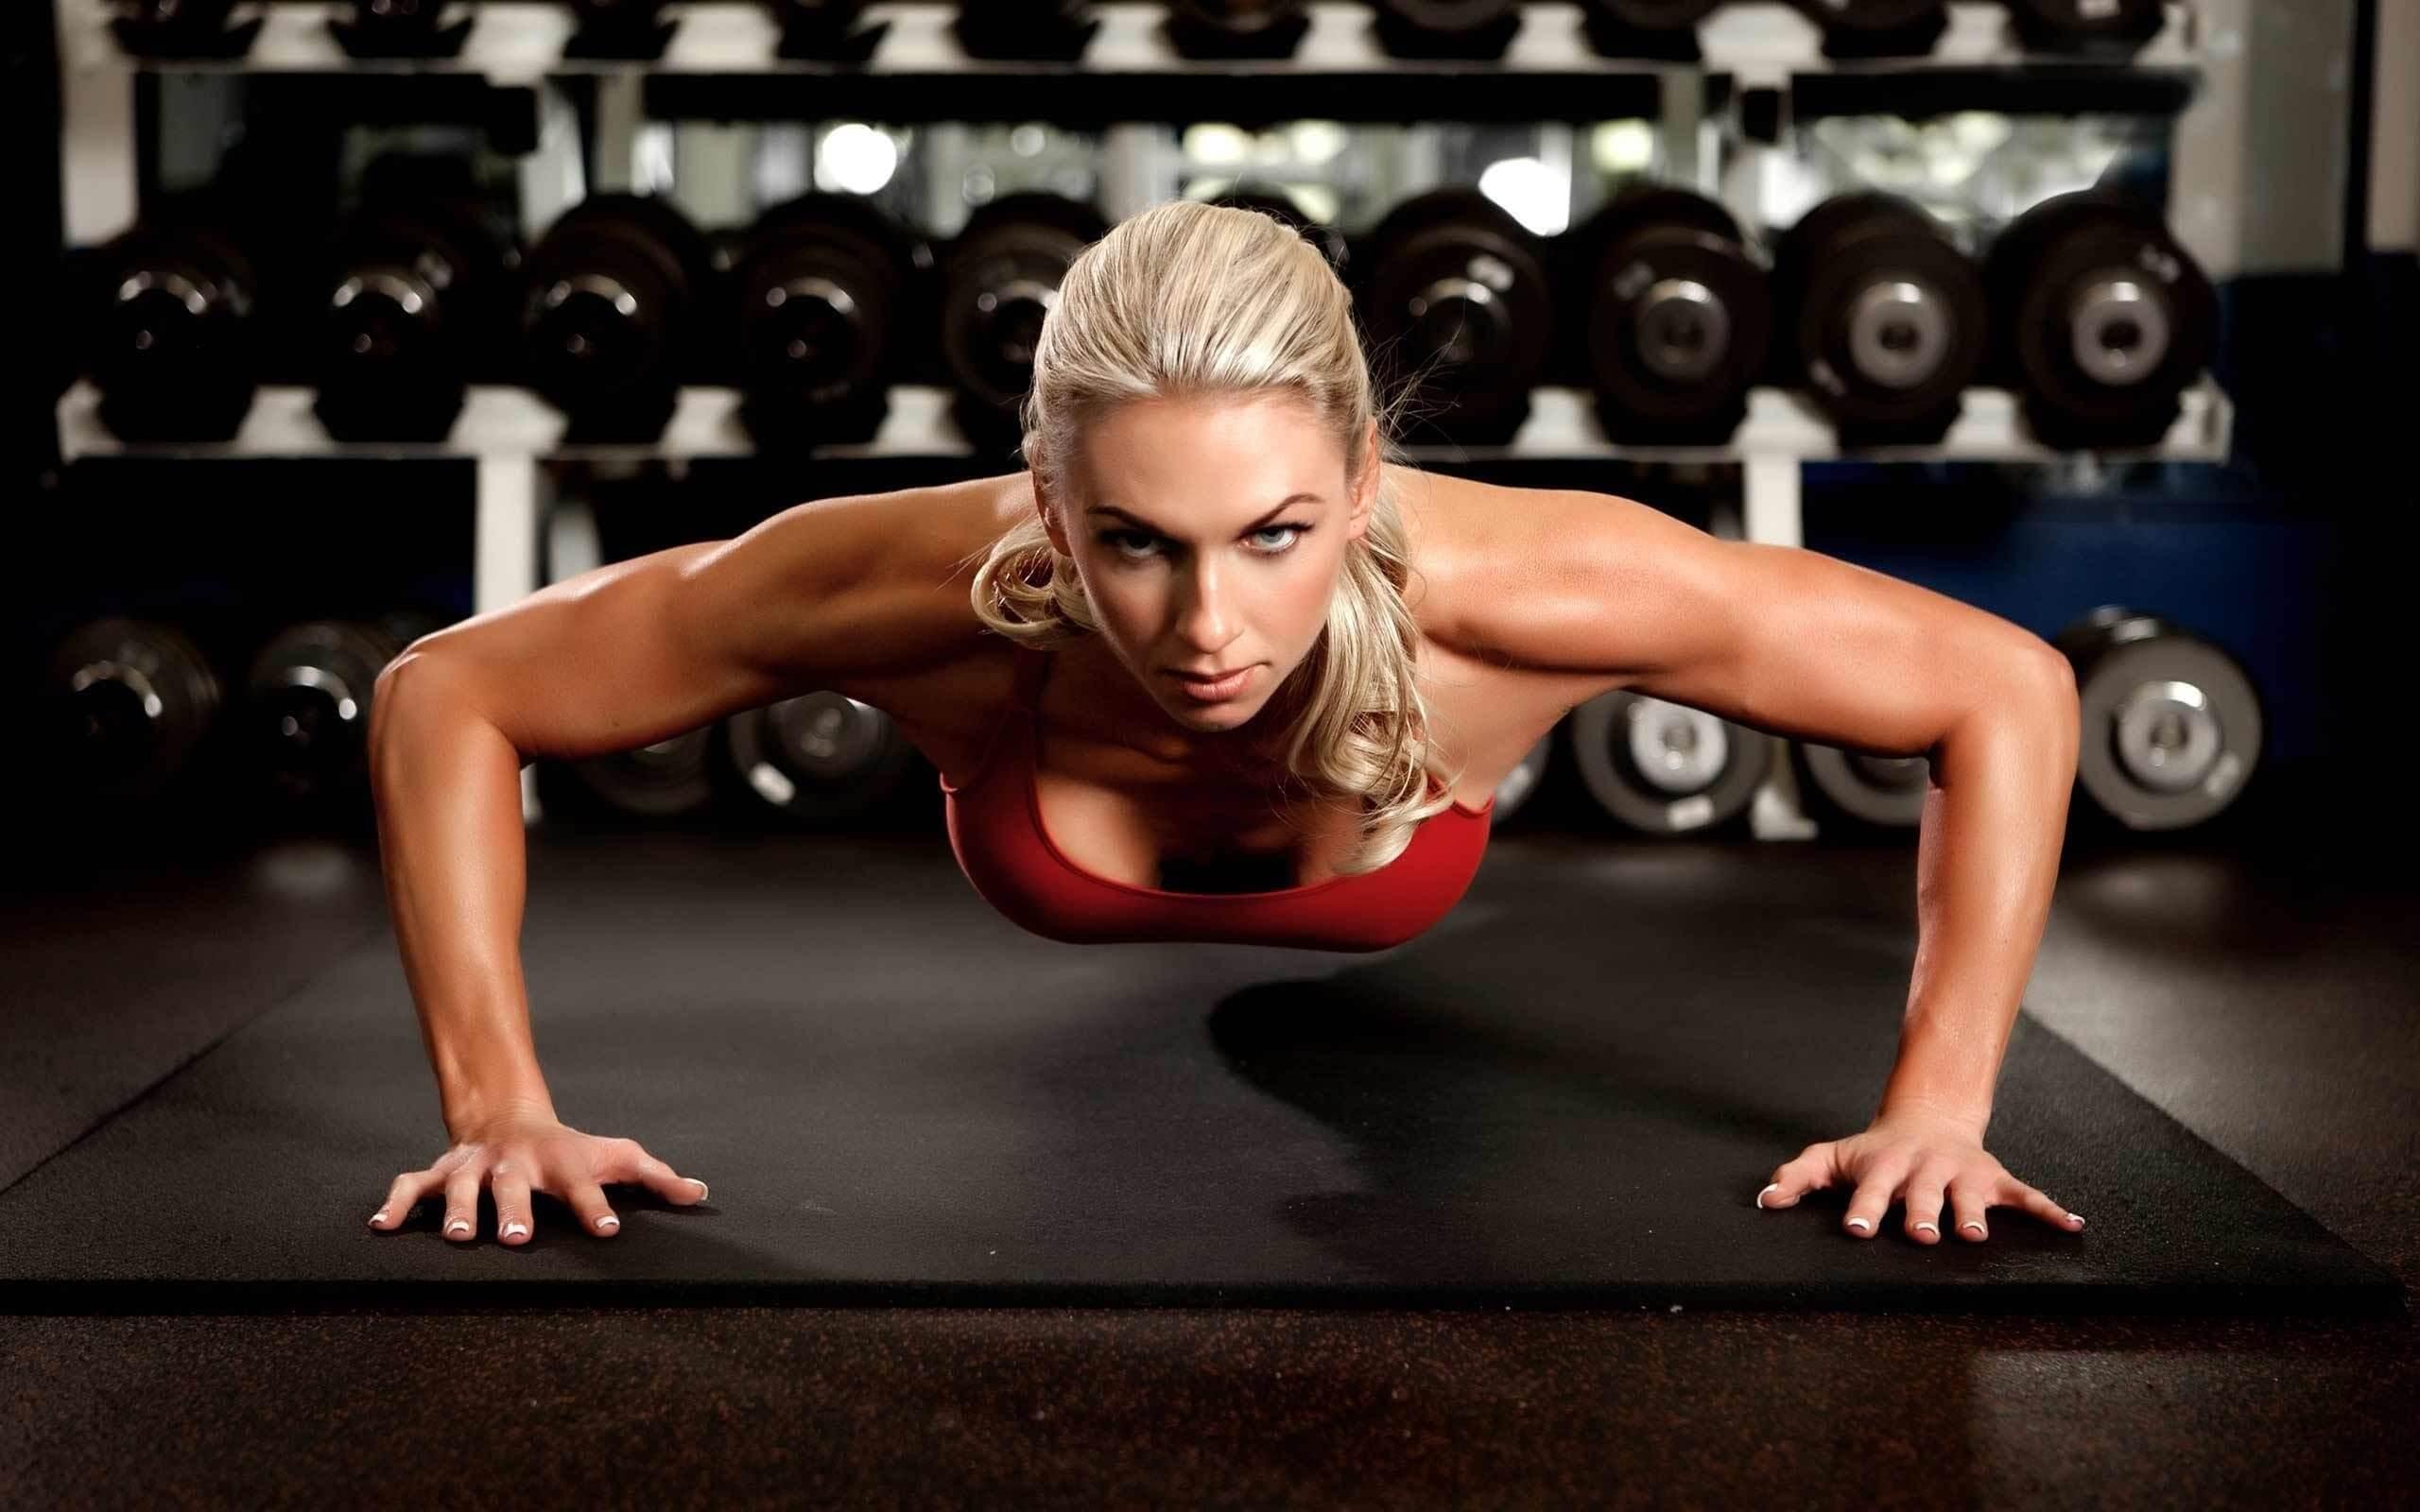 Hot Sexy Gym Girl Wallpaper for Android - APK Download